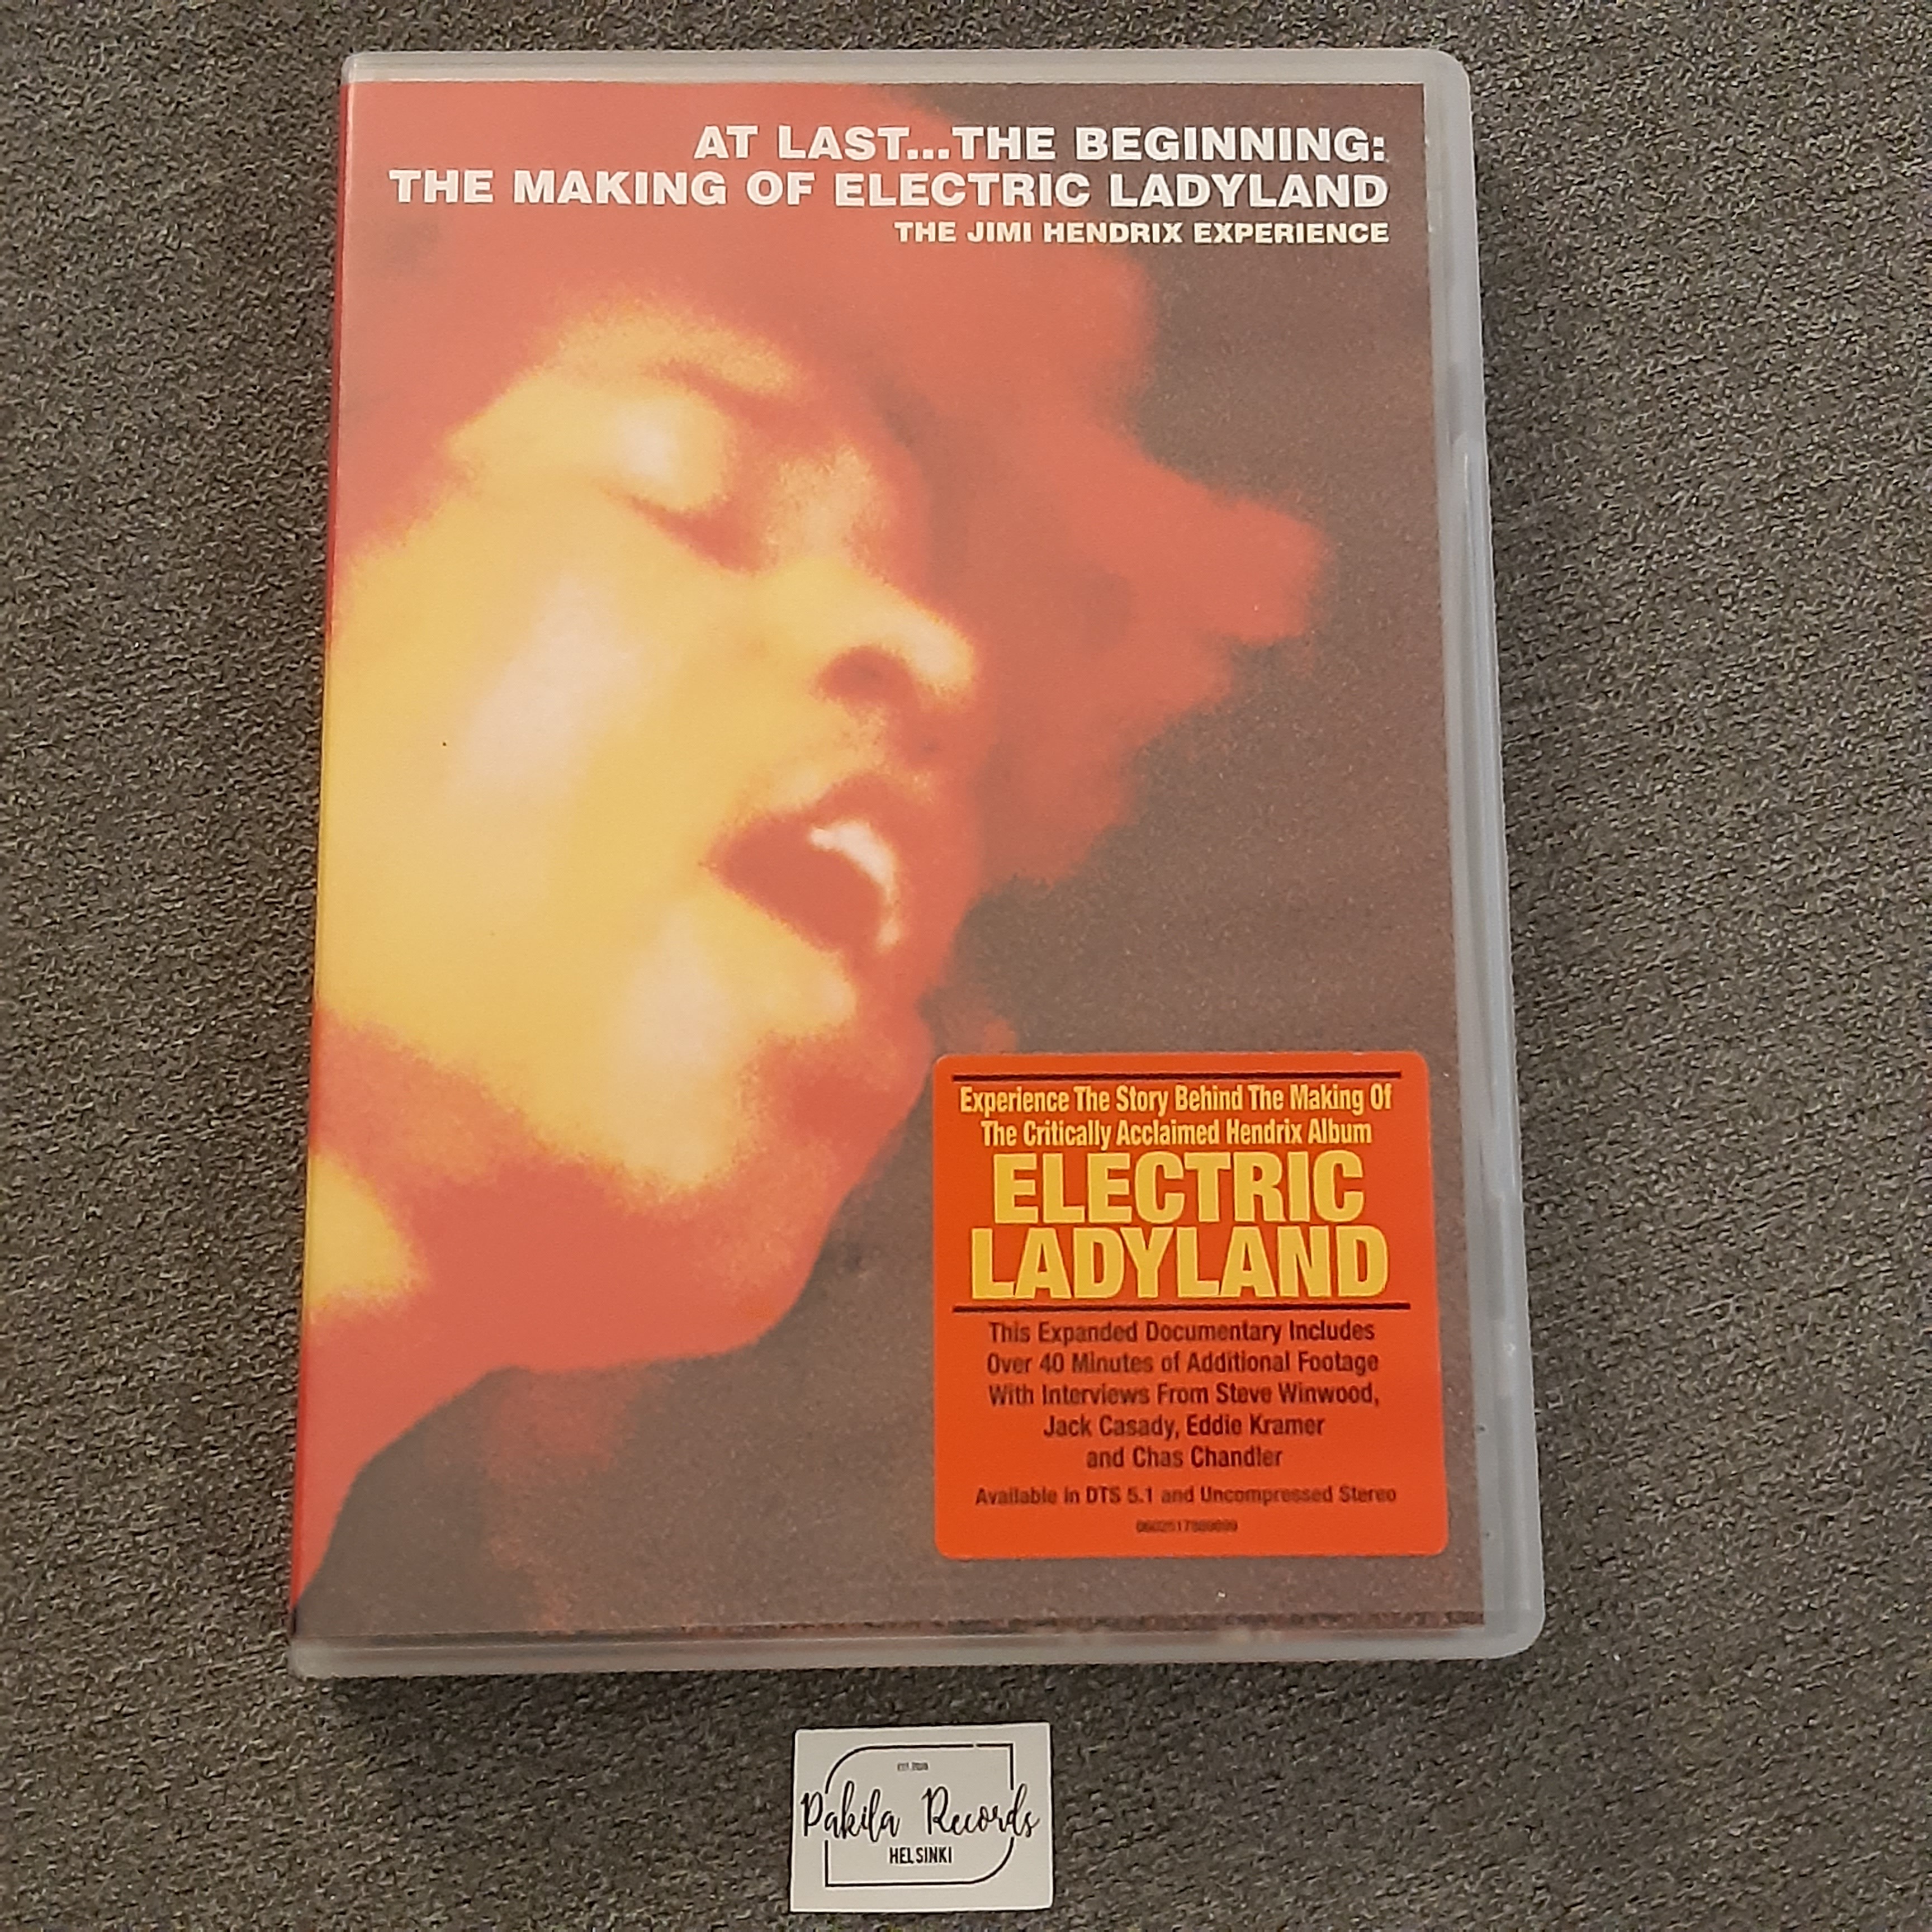 The Jimi Hendrix Experience - At Last... The Beginning: The Making Of... - DVD (käytetty)